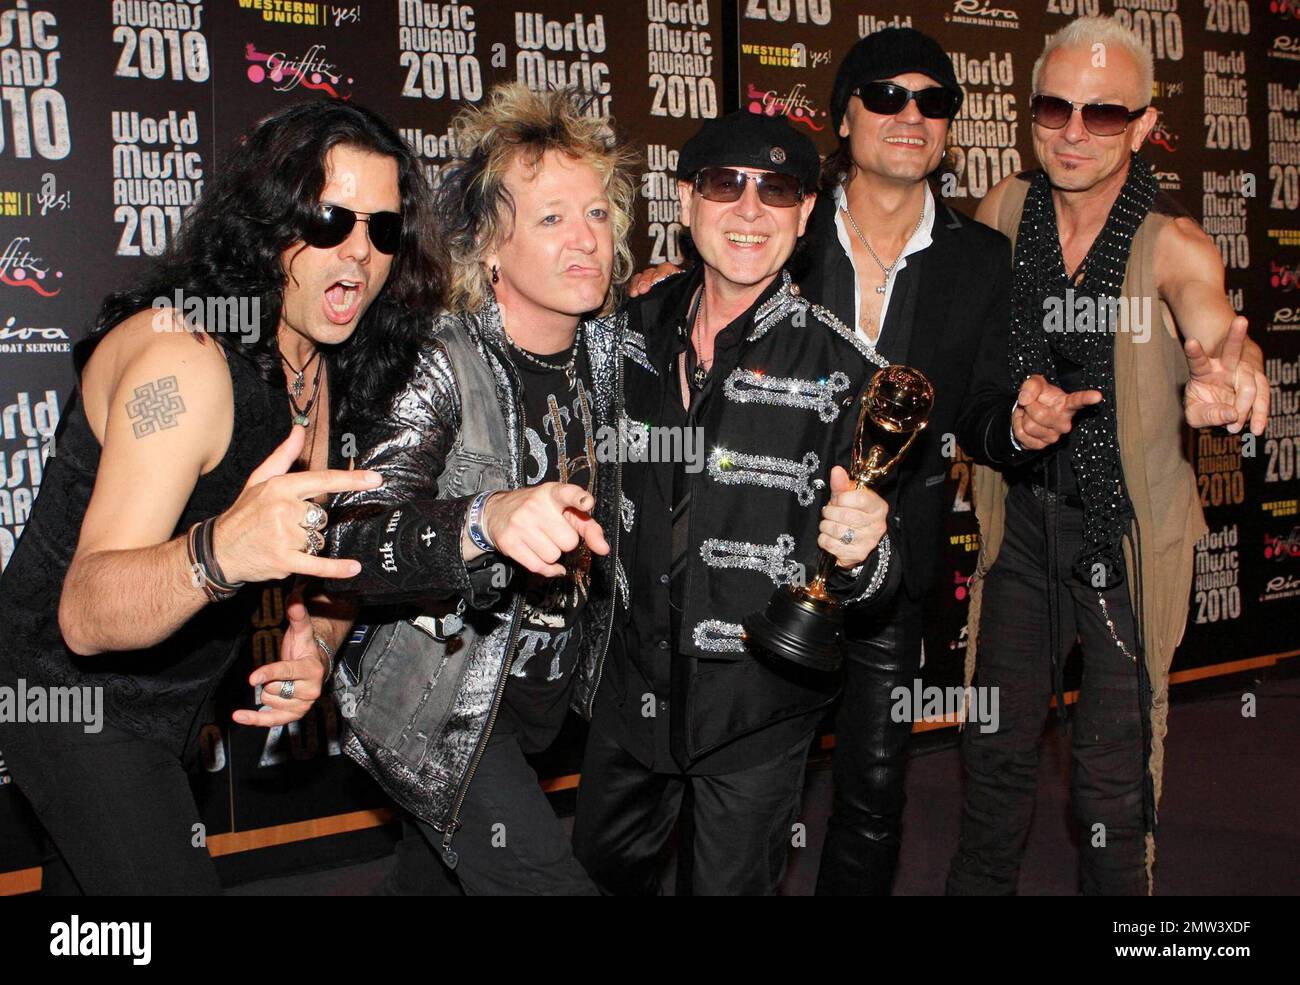 Pawel Maciwoda, James Kottak, Klaus Meine, Matthias Jabs and Rudolf Schenker of the German rock band Scorpions pose with their award at the Sporting Club Monte-Carlo after the annual World Music Awards 2010.  The award show, which was founded in 1989 to honor international recording artists based on worldwide sales figures, was hosted by actresses Michelle Rodriguez and Hayden Panettiere.  Musicians who performed at the event included Jennifer Lopez, Akon, 50 Cent and Scorpions. Monte Carlo, Monaco. 05/18/10. Stock Photo